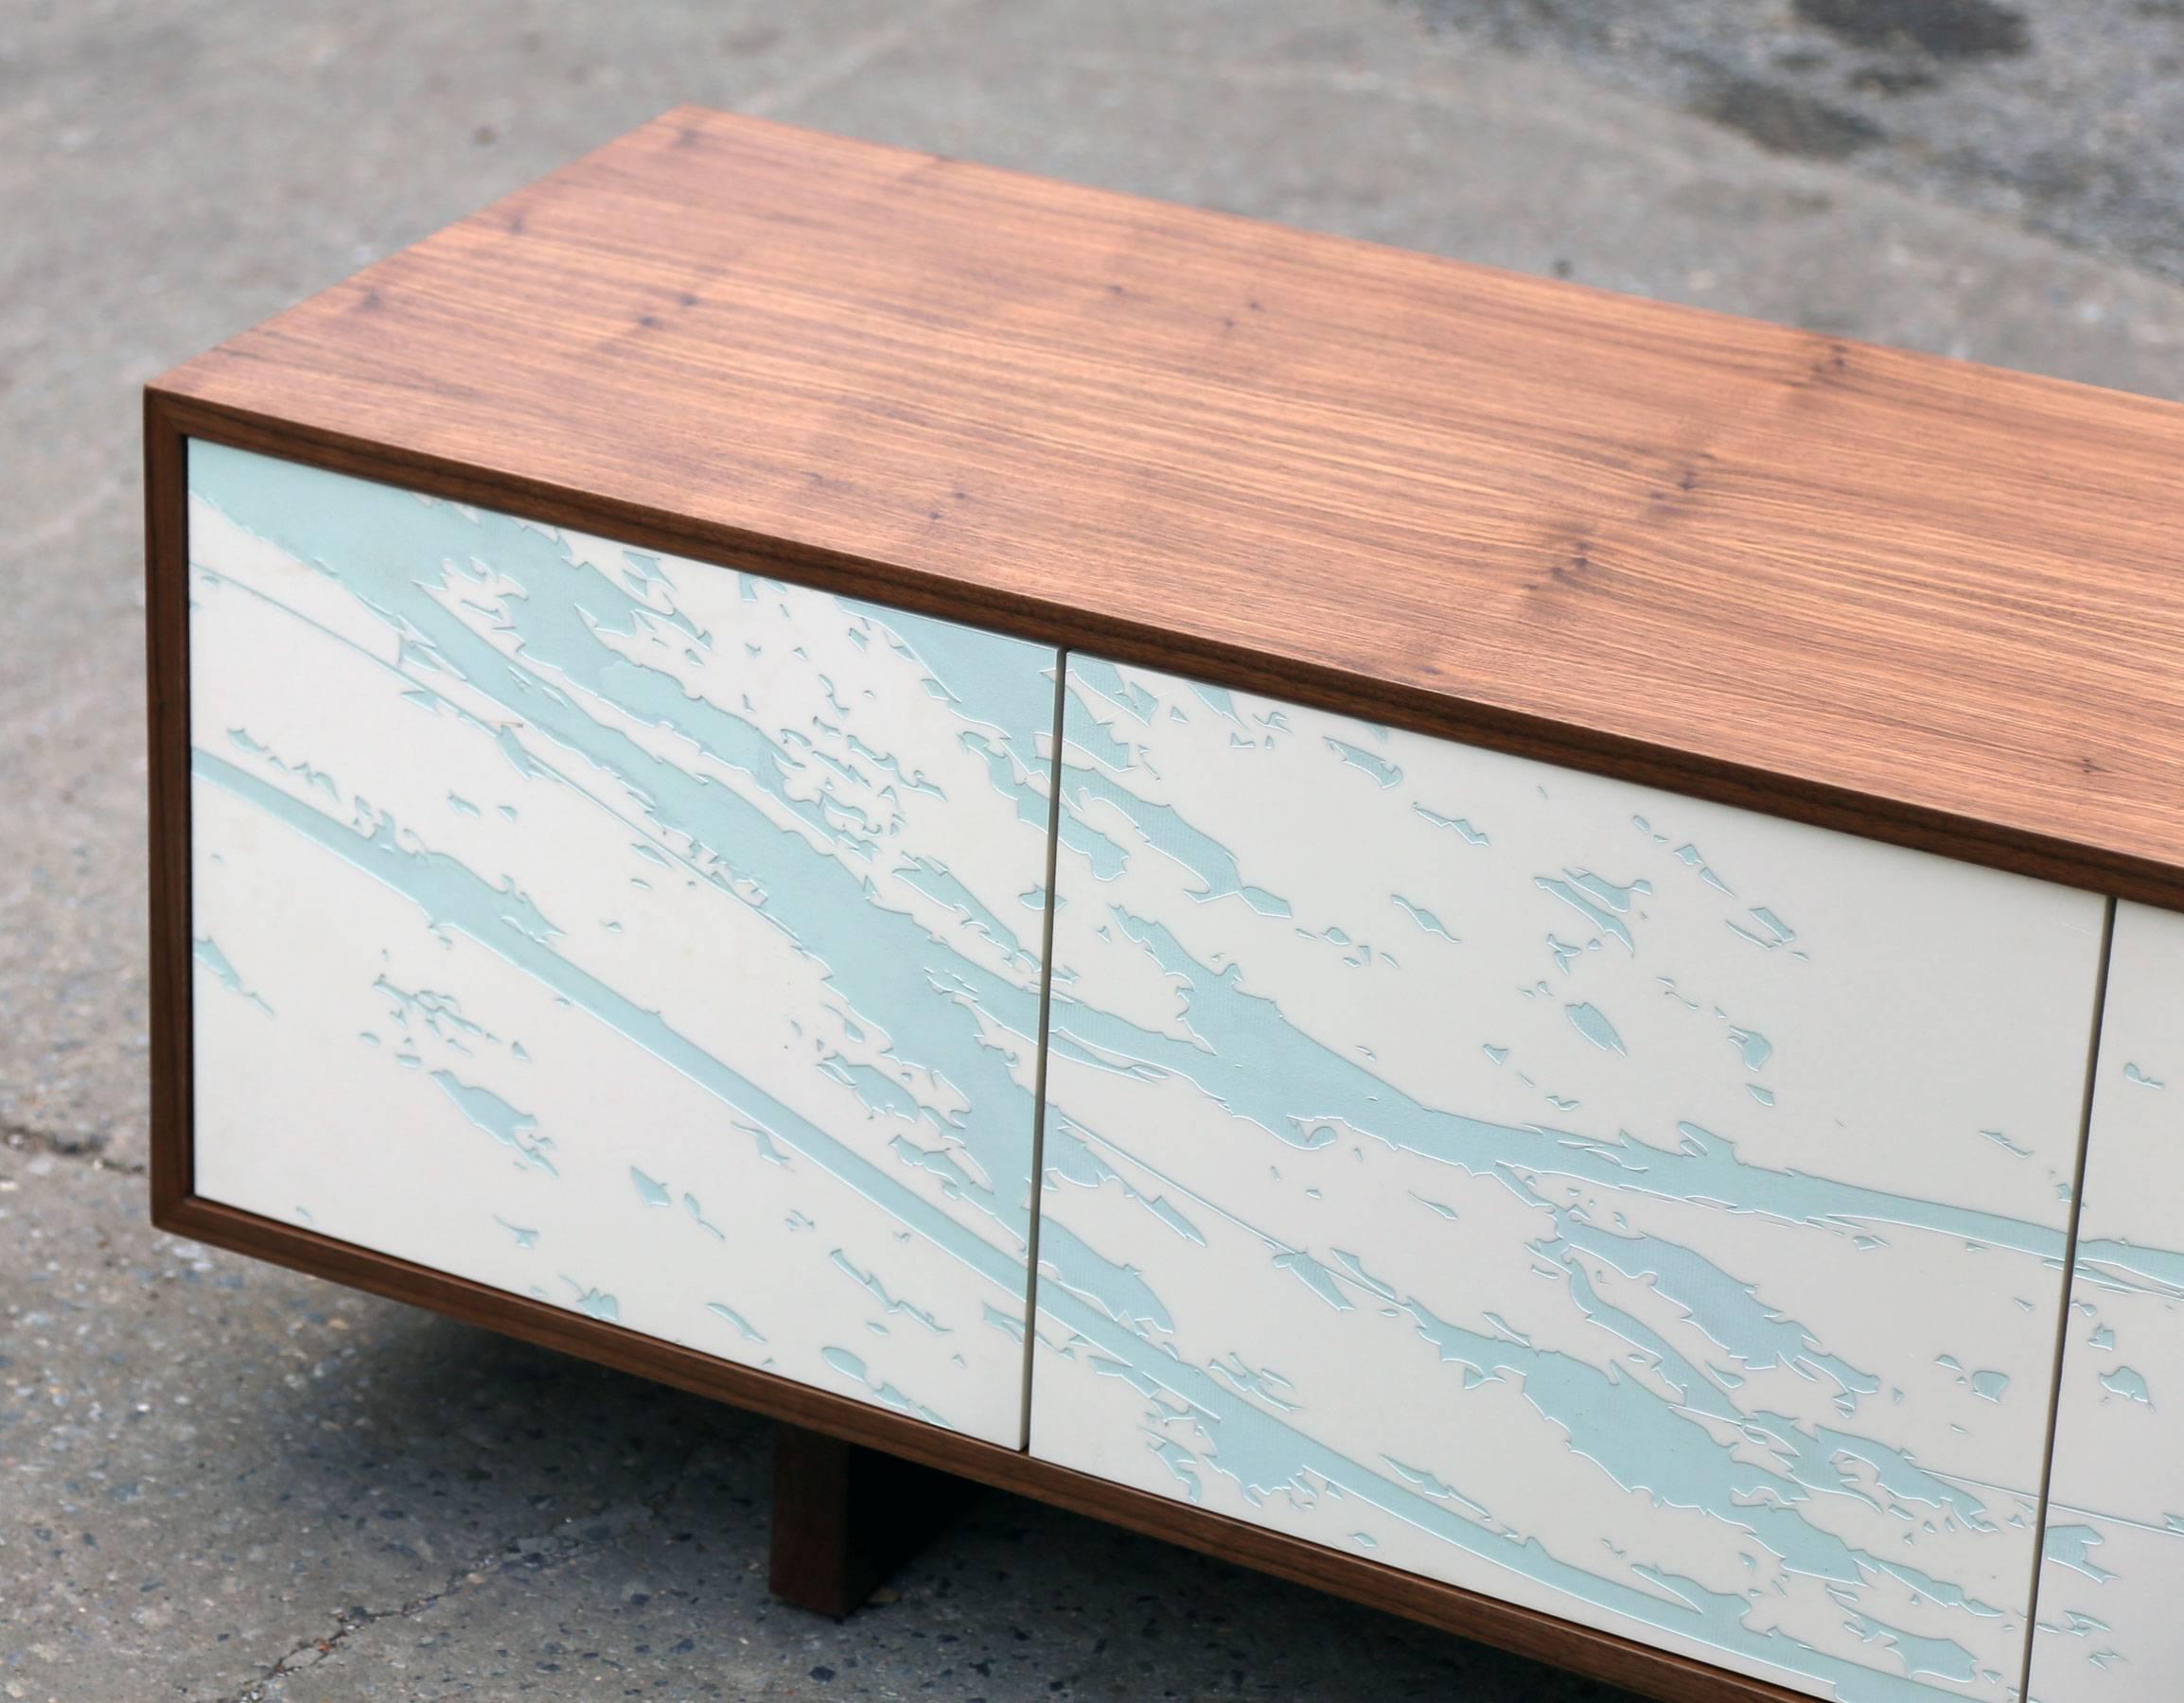 Shimna Neosho Walnut Credenza with 'Splash' Seafoam Engraved Art In New Condition For Sale In Brooklyn, NY